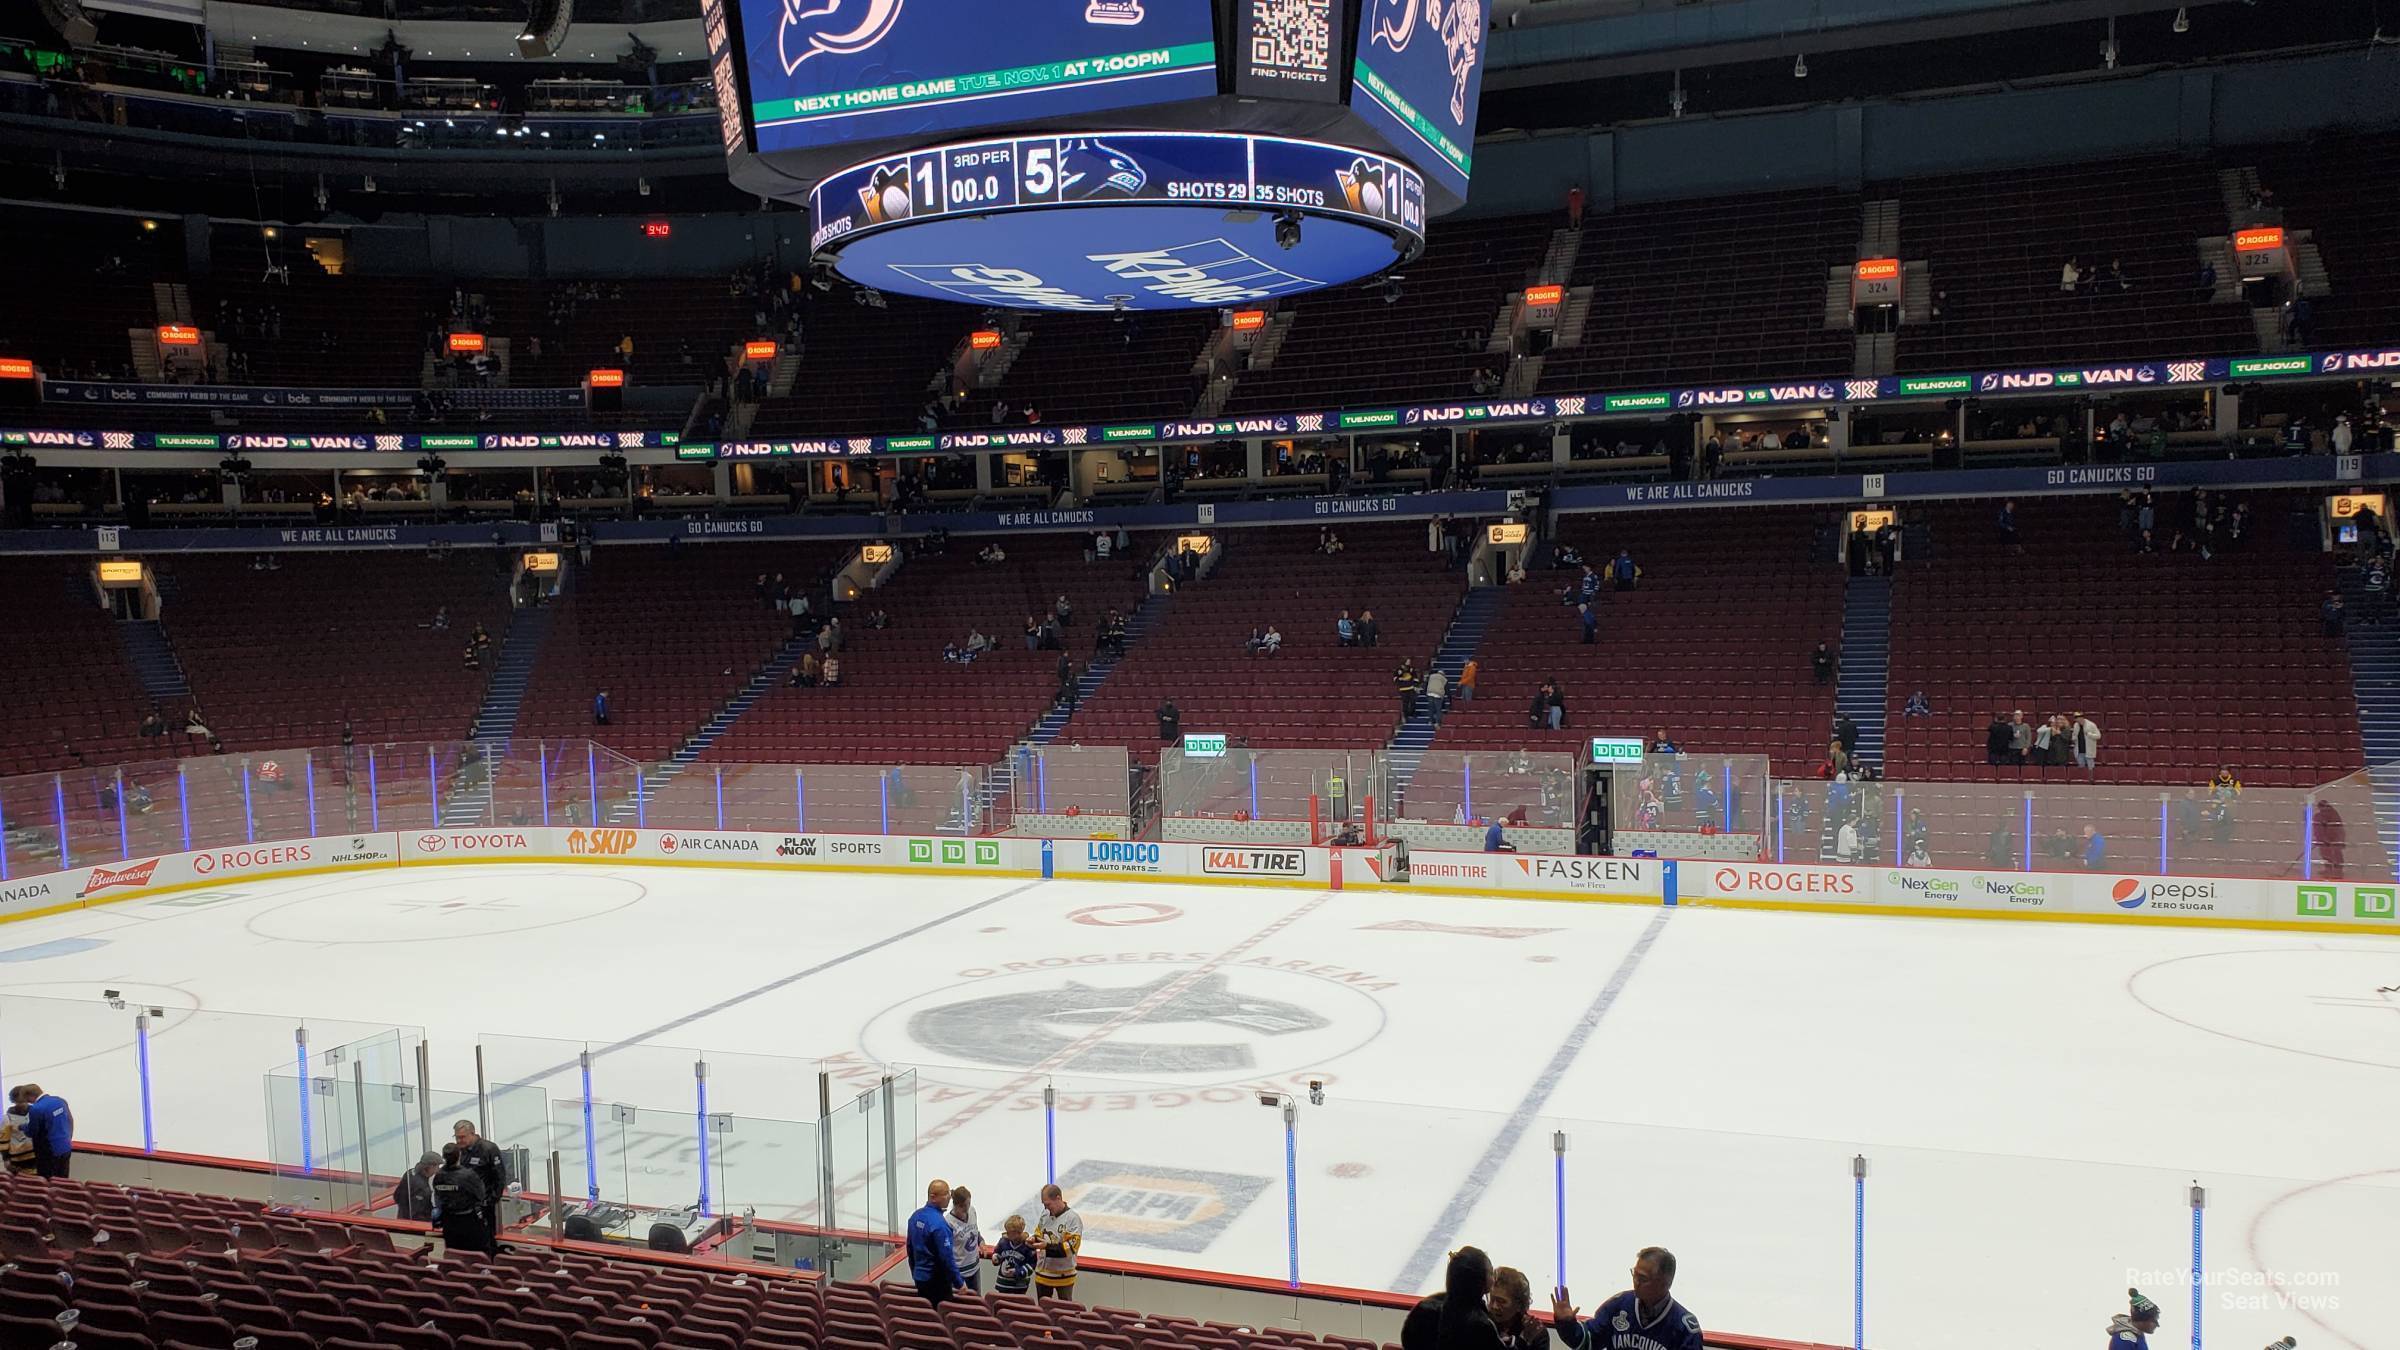 section 105, row 20 seat view  for hockey - rogers arena